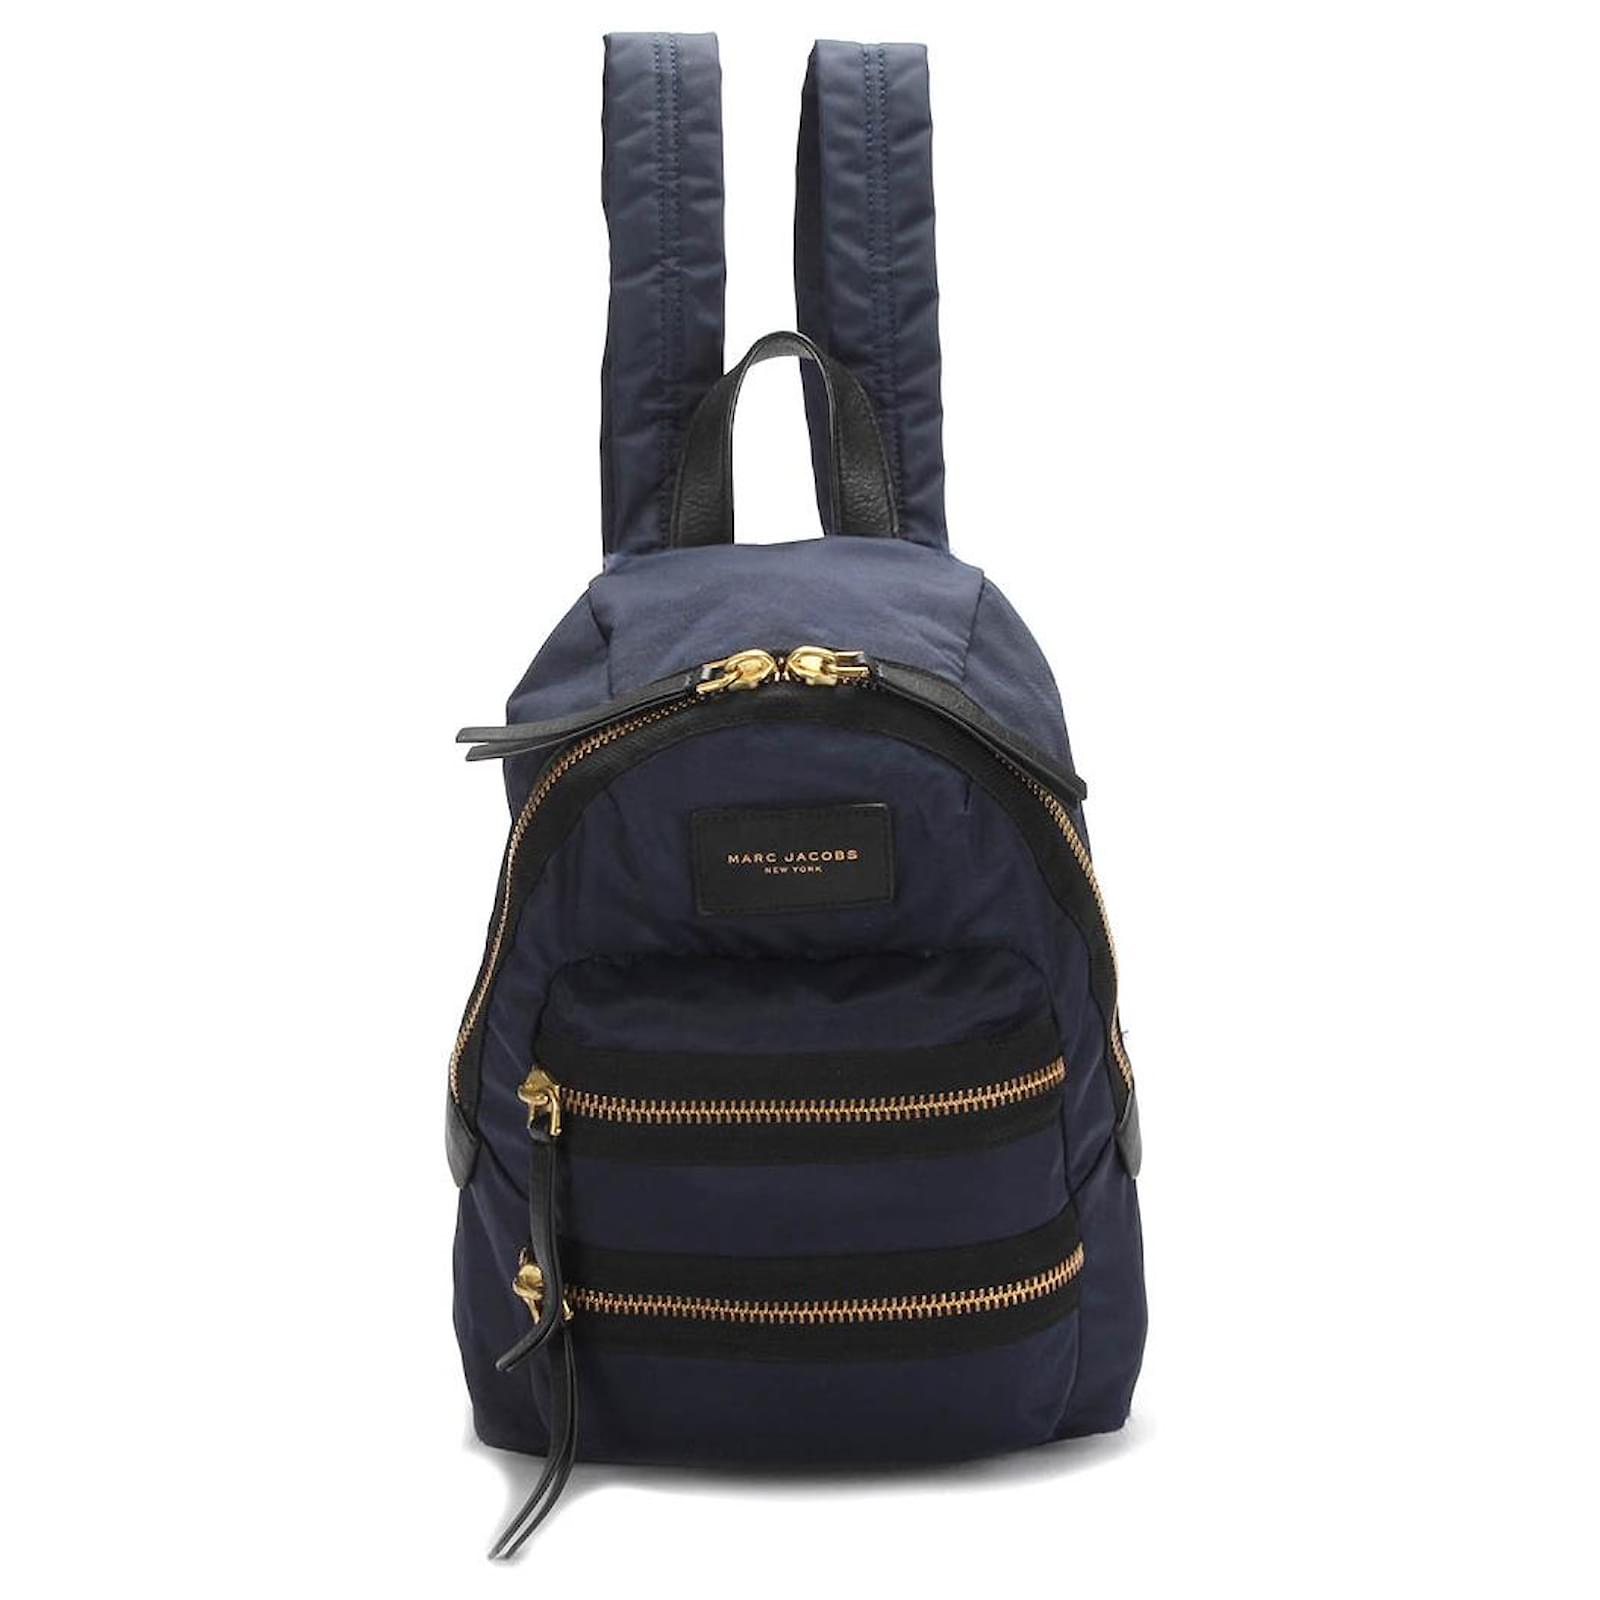 MARC JACOBS MARC JACOBS Pack Shot Mini Backpack, 48% OFF